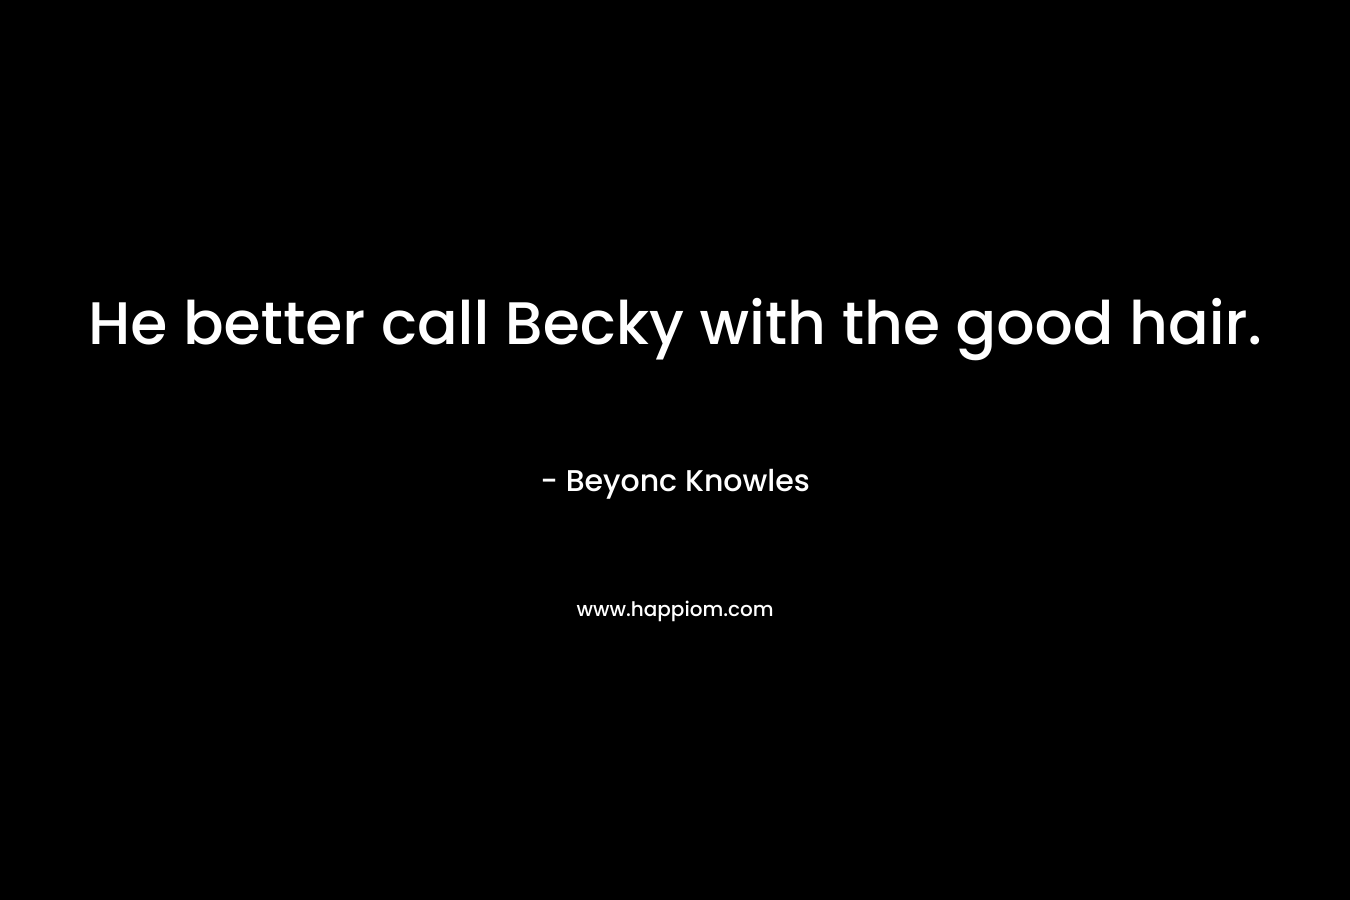 He better call Becky with the good hair.